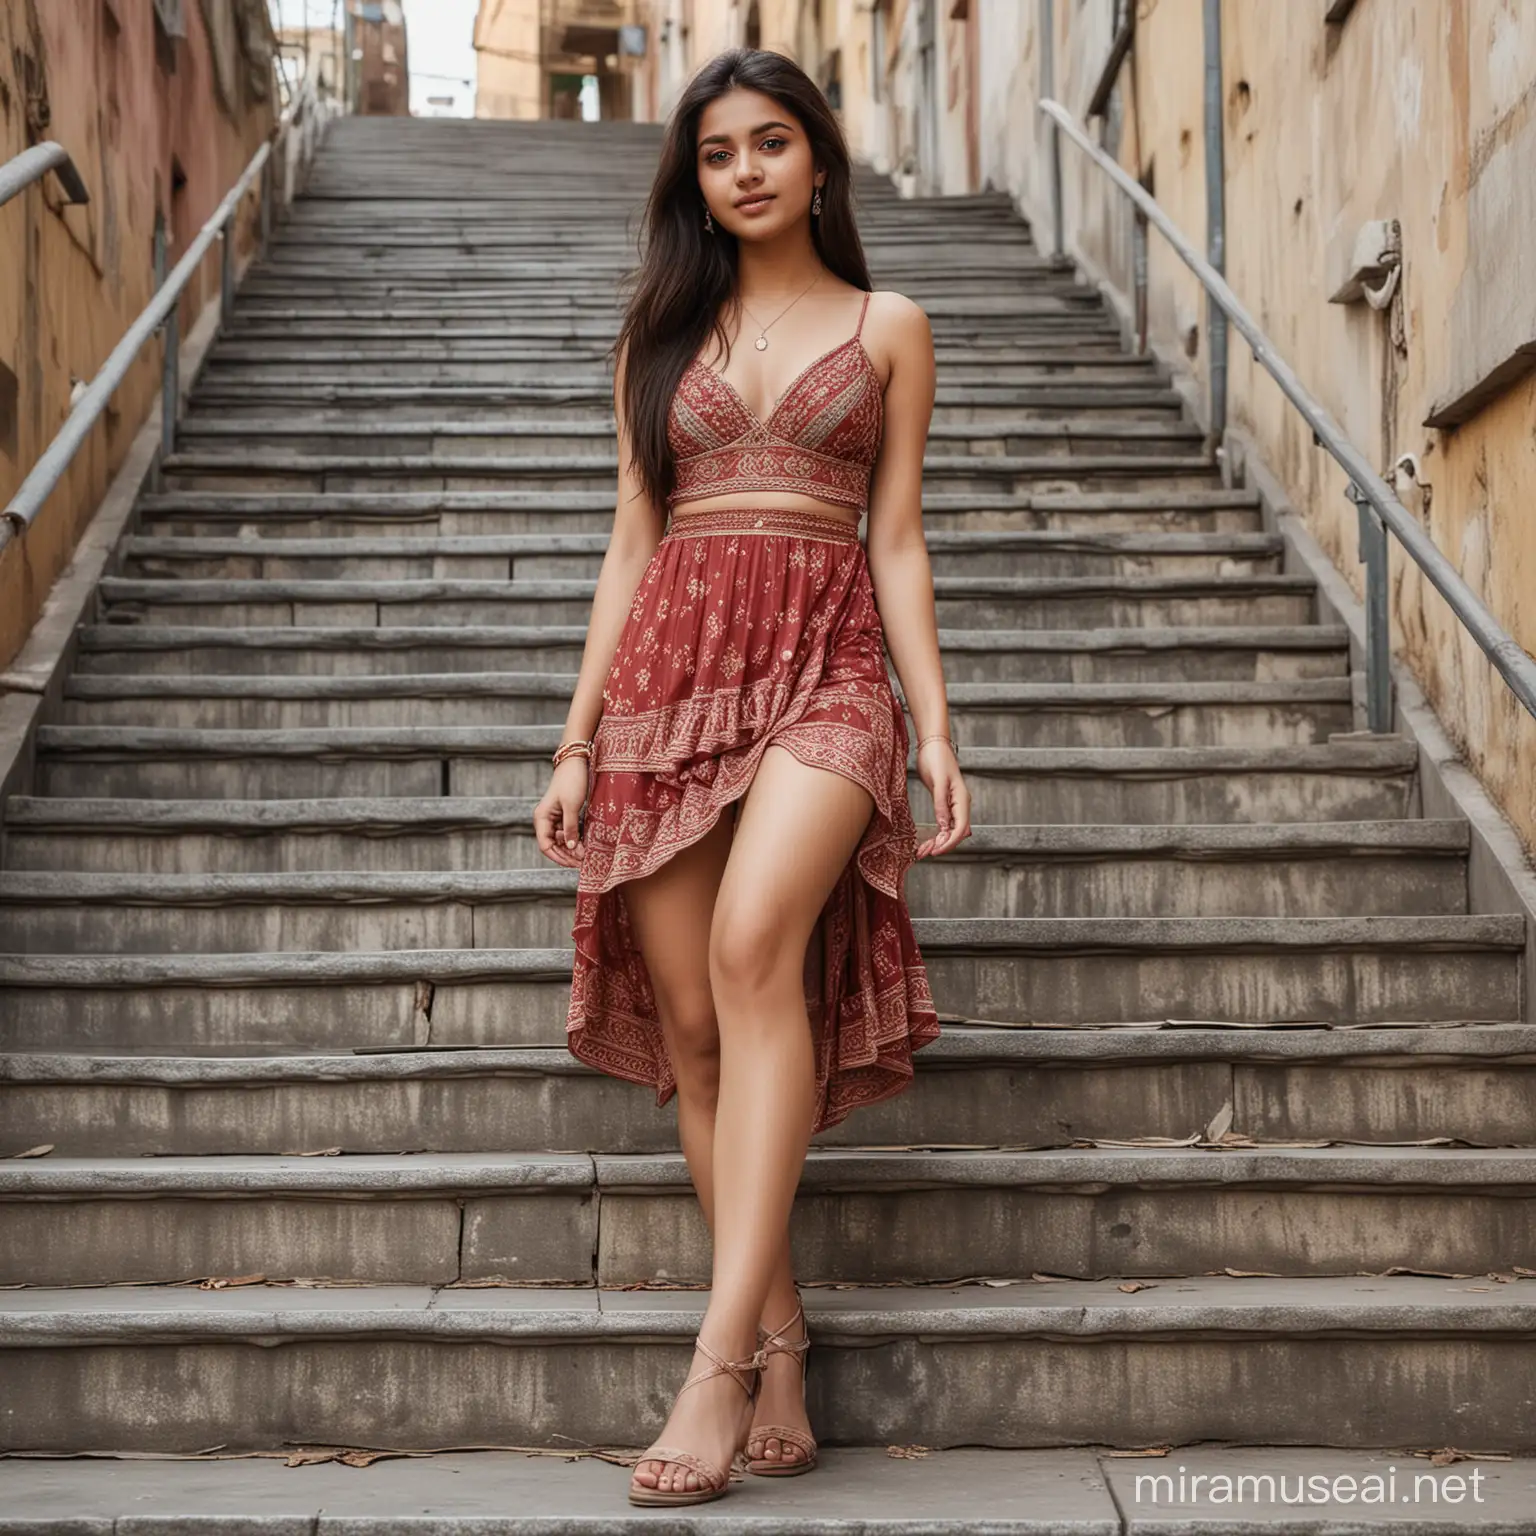 Make a realistic image of Indian x Russian girl age is 19. Wearing aesthetic clothes. Background like a stairs. Don't match clothes and stairs colour